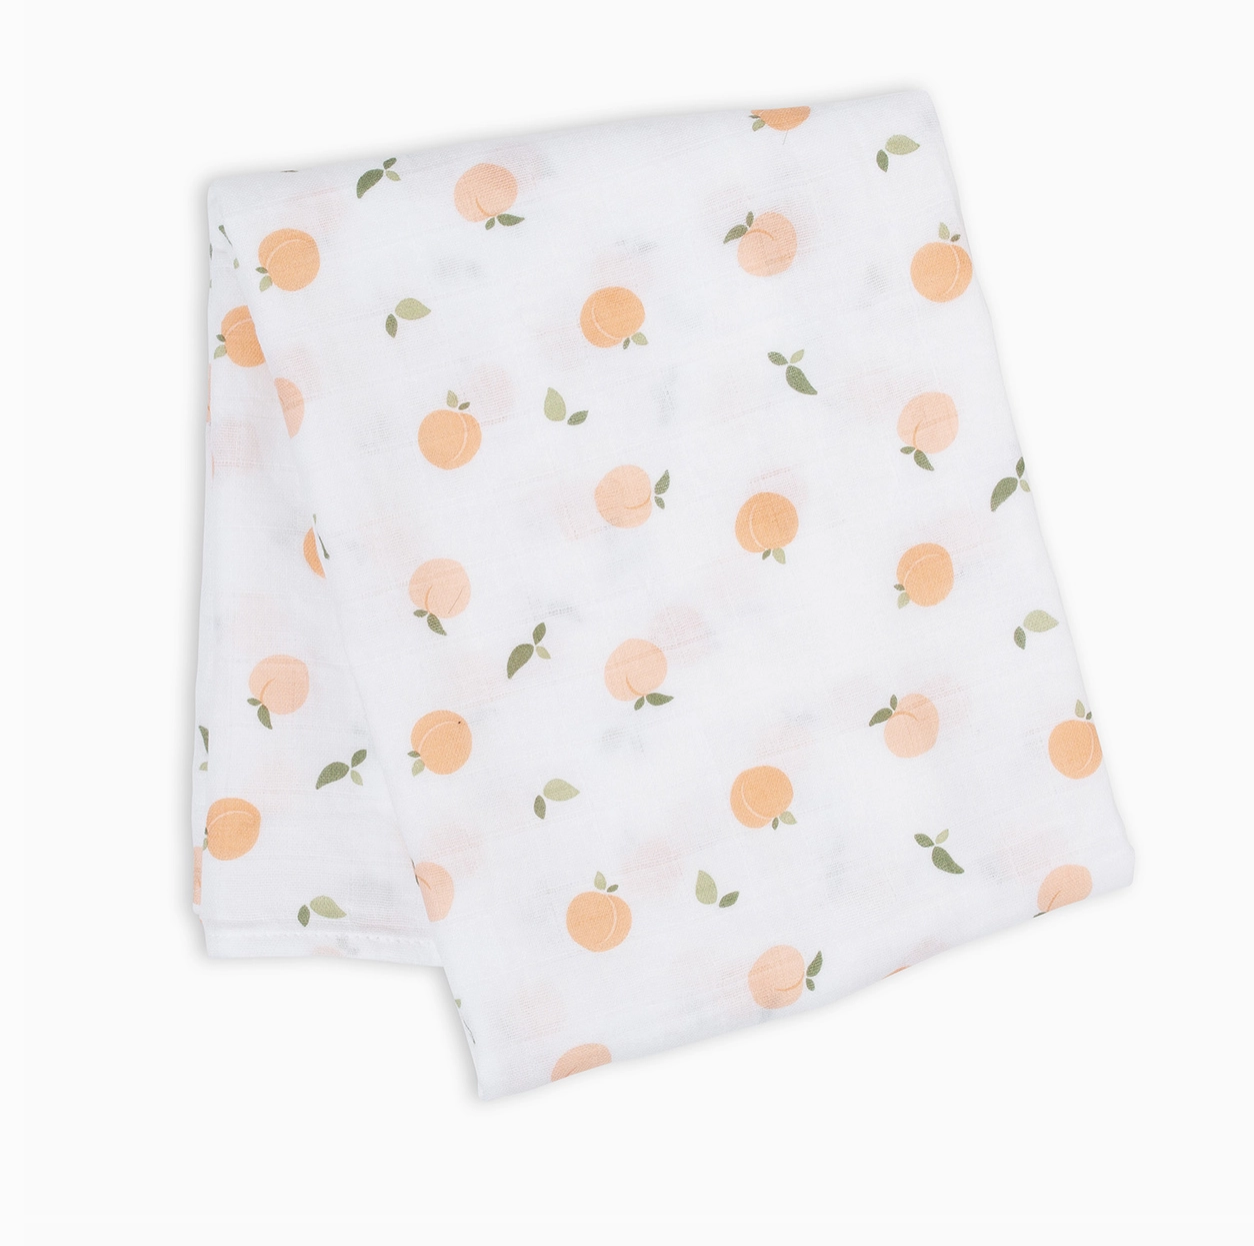 Muslin Cotton Swaddle Blanket - Large - Peaches